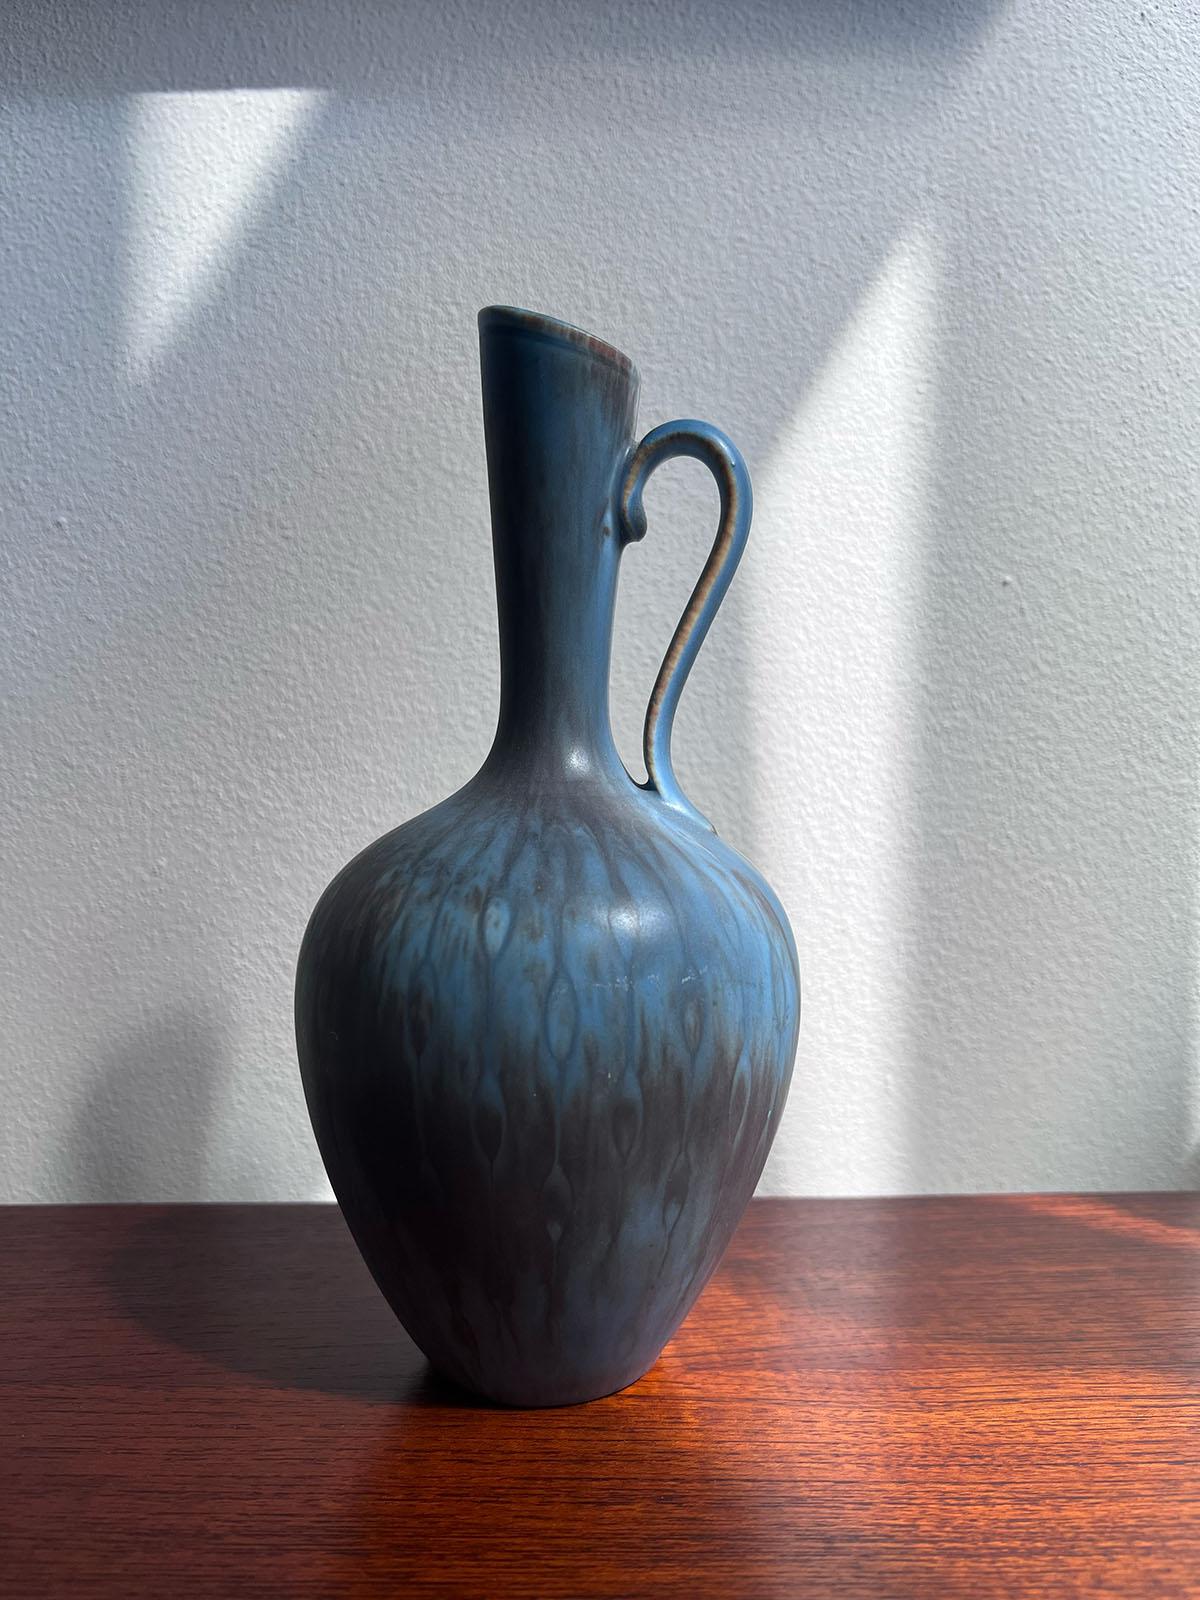 Vase in blue-glazed stoneware designed and signed by Gunnar Nylund and produced by Rörstrands in Sweden, 1950s.

Date of manufacture: 1950s
Origin: Sweden
Material: blue-glazed stoneware
Dimensions: height 22 cm x diameter 6 cm
Condition: in very